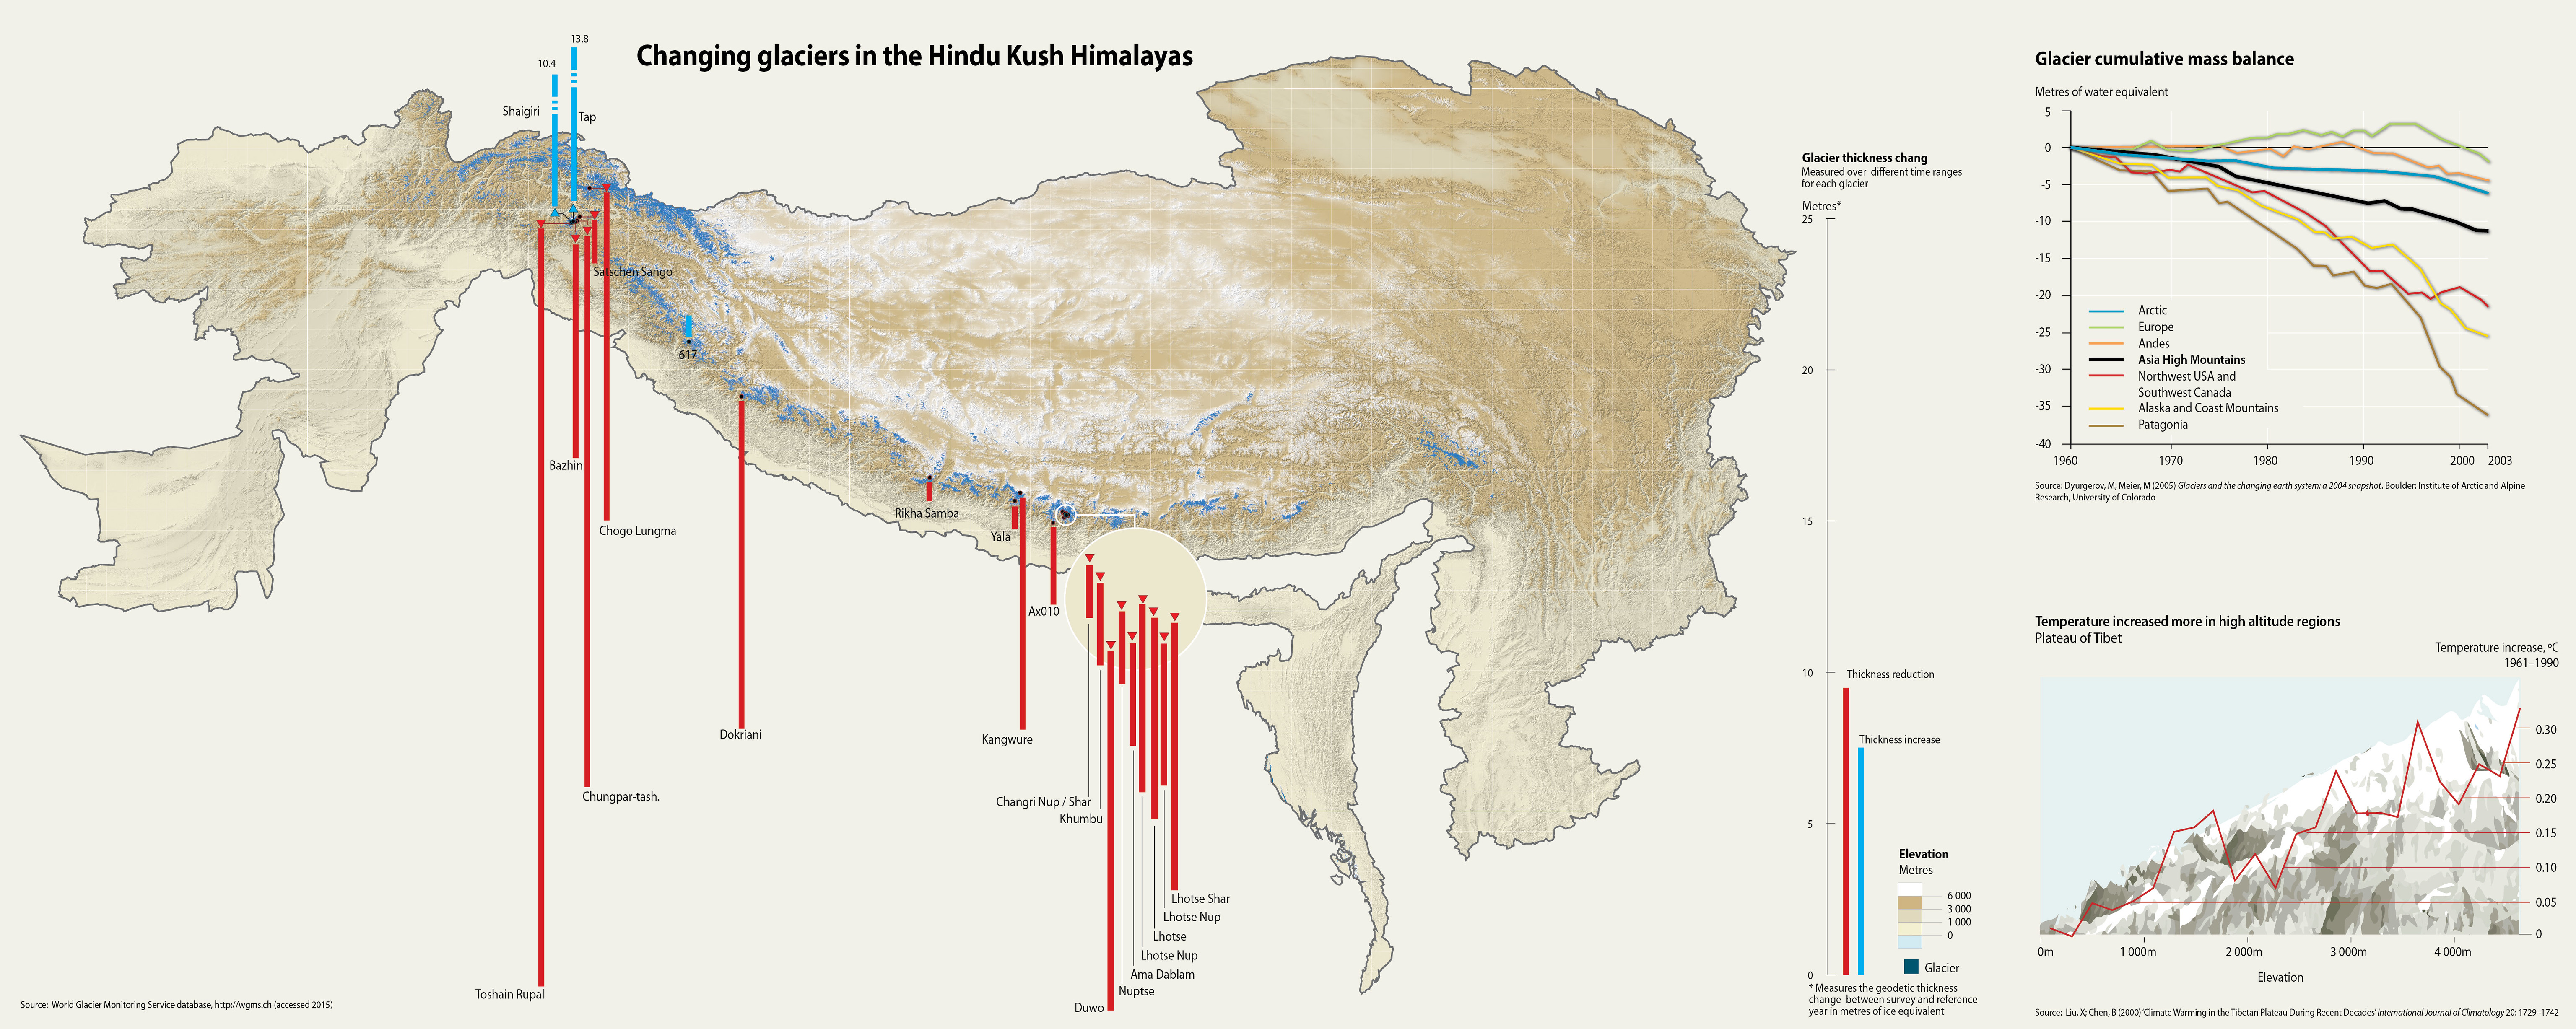 The loss of glacial ice in the Himalayas due to increasing temperatures